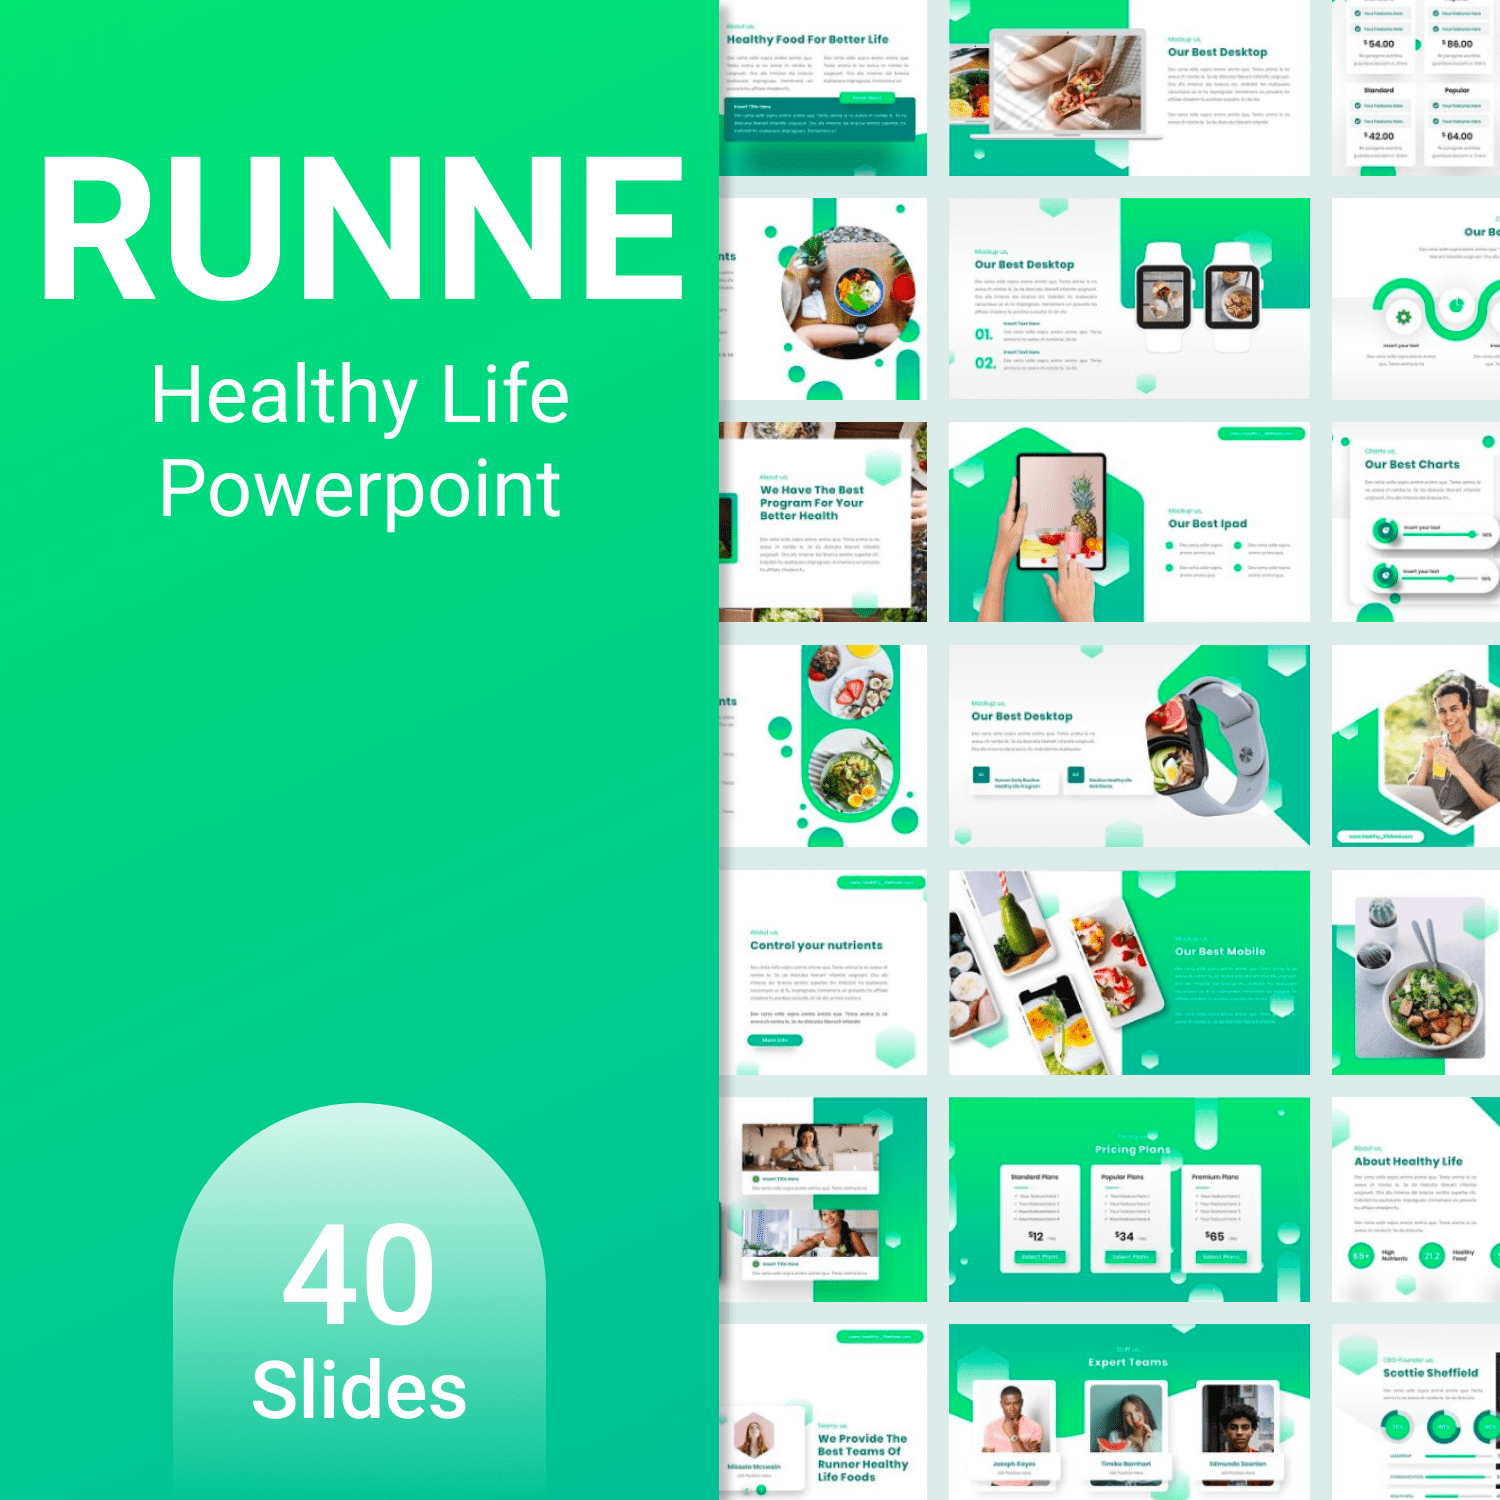 Runne - Healthy Life Powerpoint main cover.